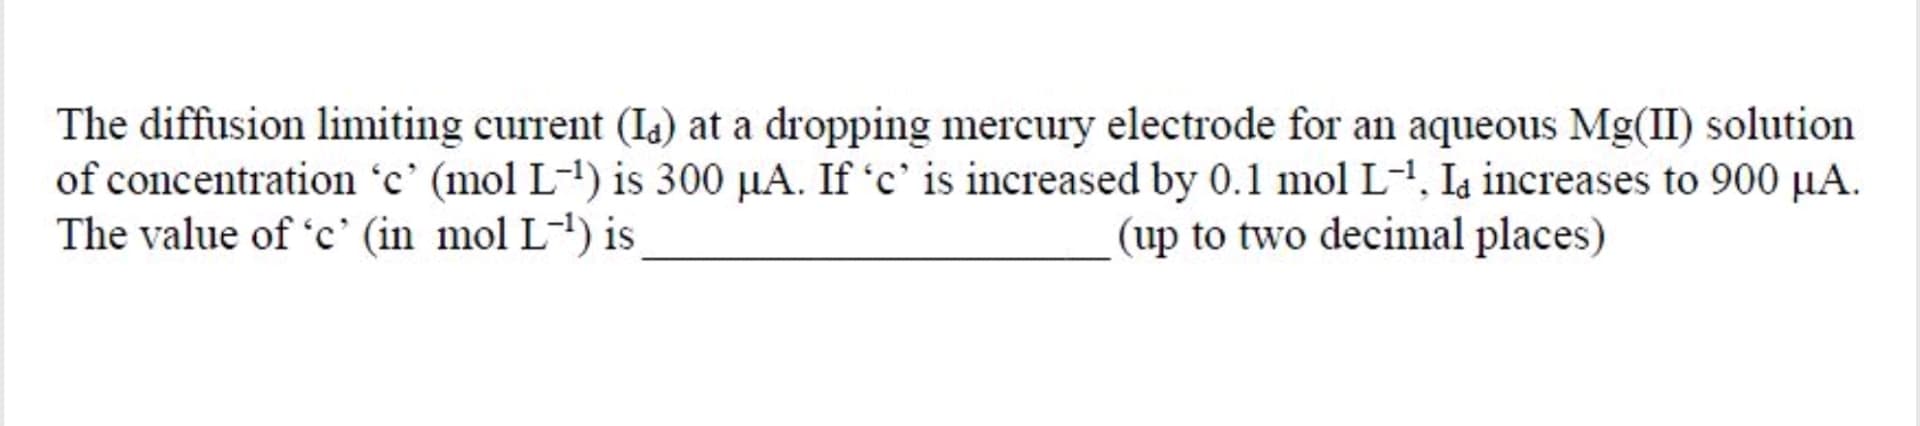 The diffusion limiting current (Is) at a dropping mercury electrode for an aqueous Mg(II) solution
of concentration 'c' (mol L-1) is 300 µA. If 'c' is increased by 0.1 mol L-1, Ia increases to 900 µA.
The value of 'c' (in mol L-') is
(up to two decinmal places)
